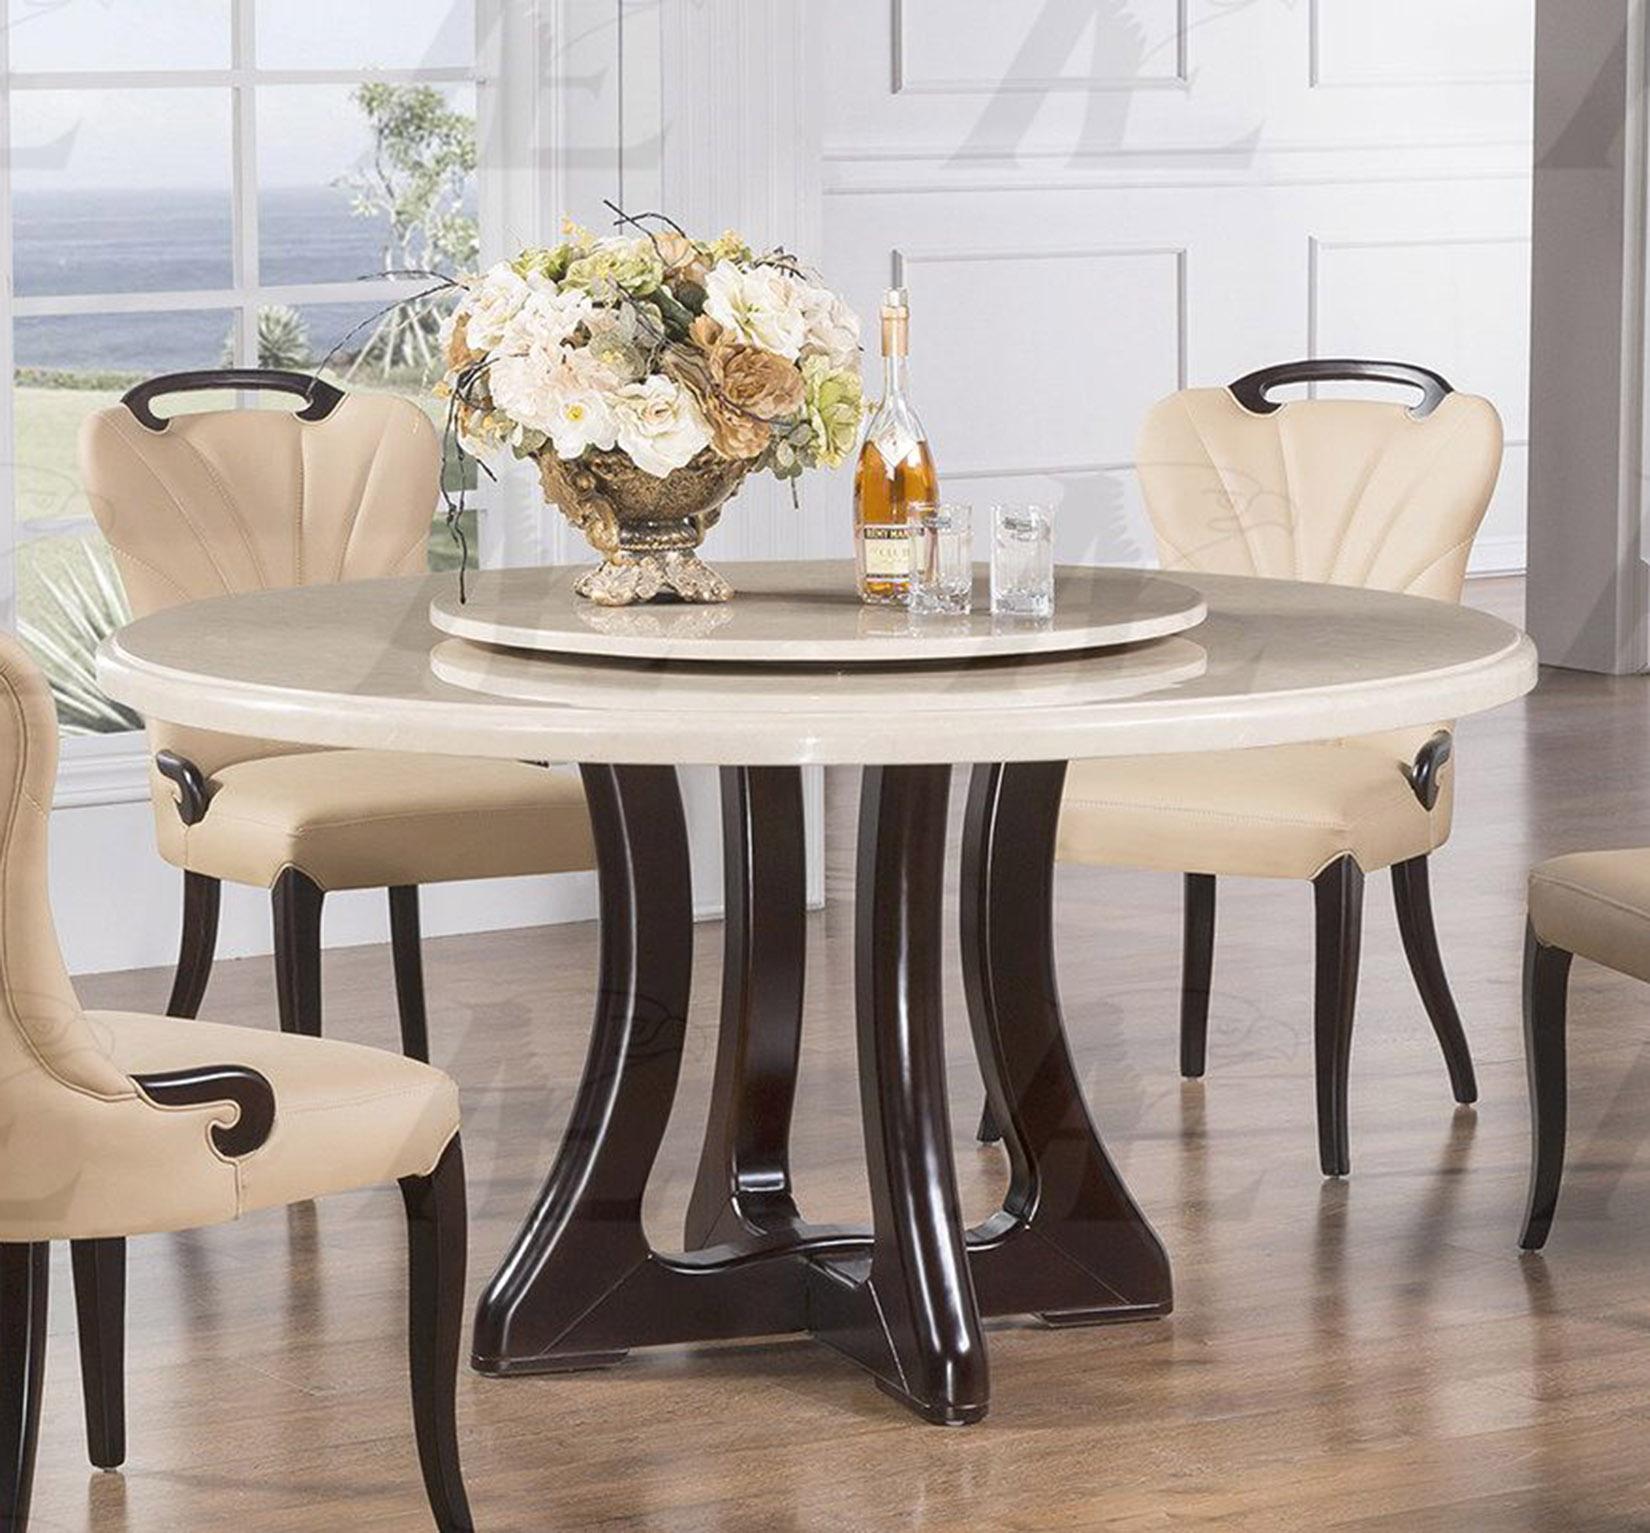 

    
Beige Faux Marble Top Round Dining Table w/ Lazy Susan American Eagle DT-H222
